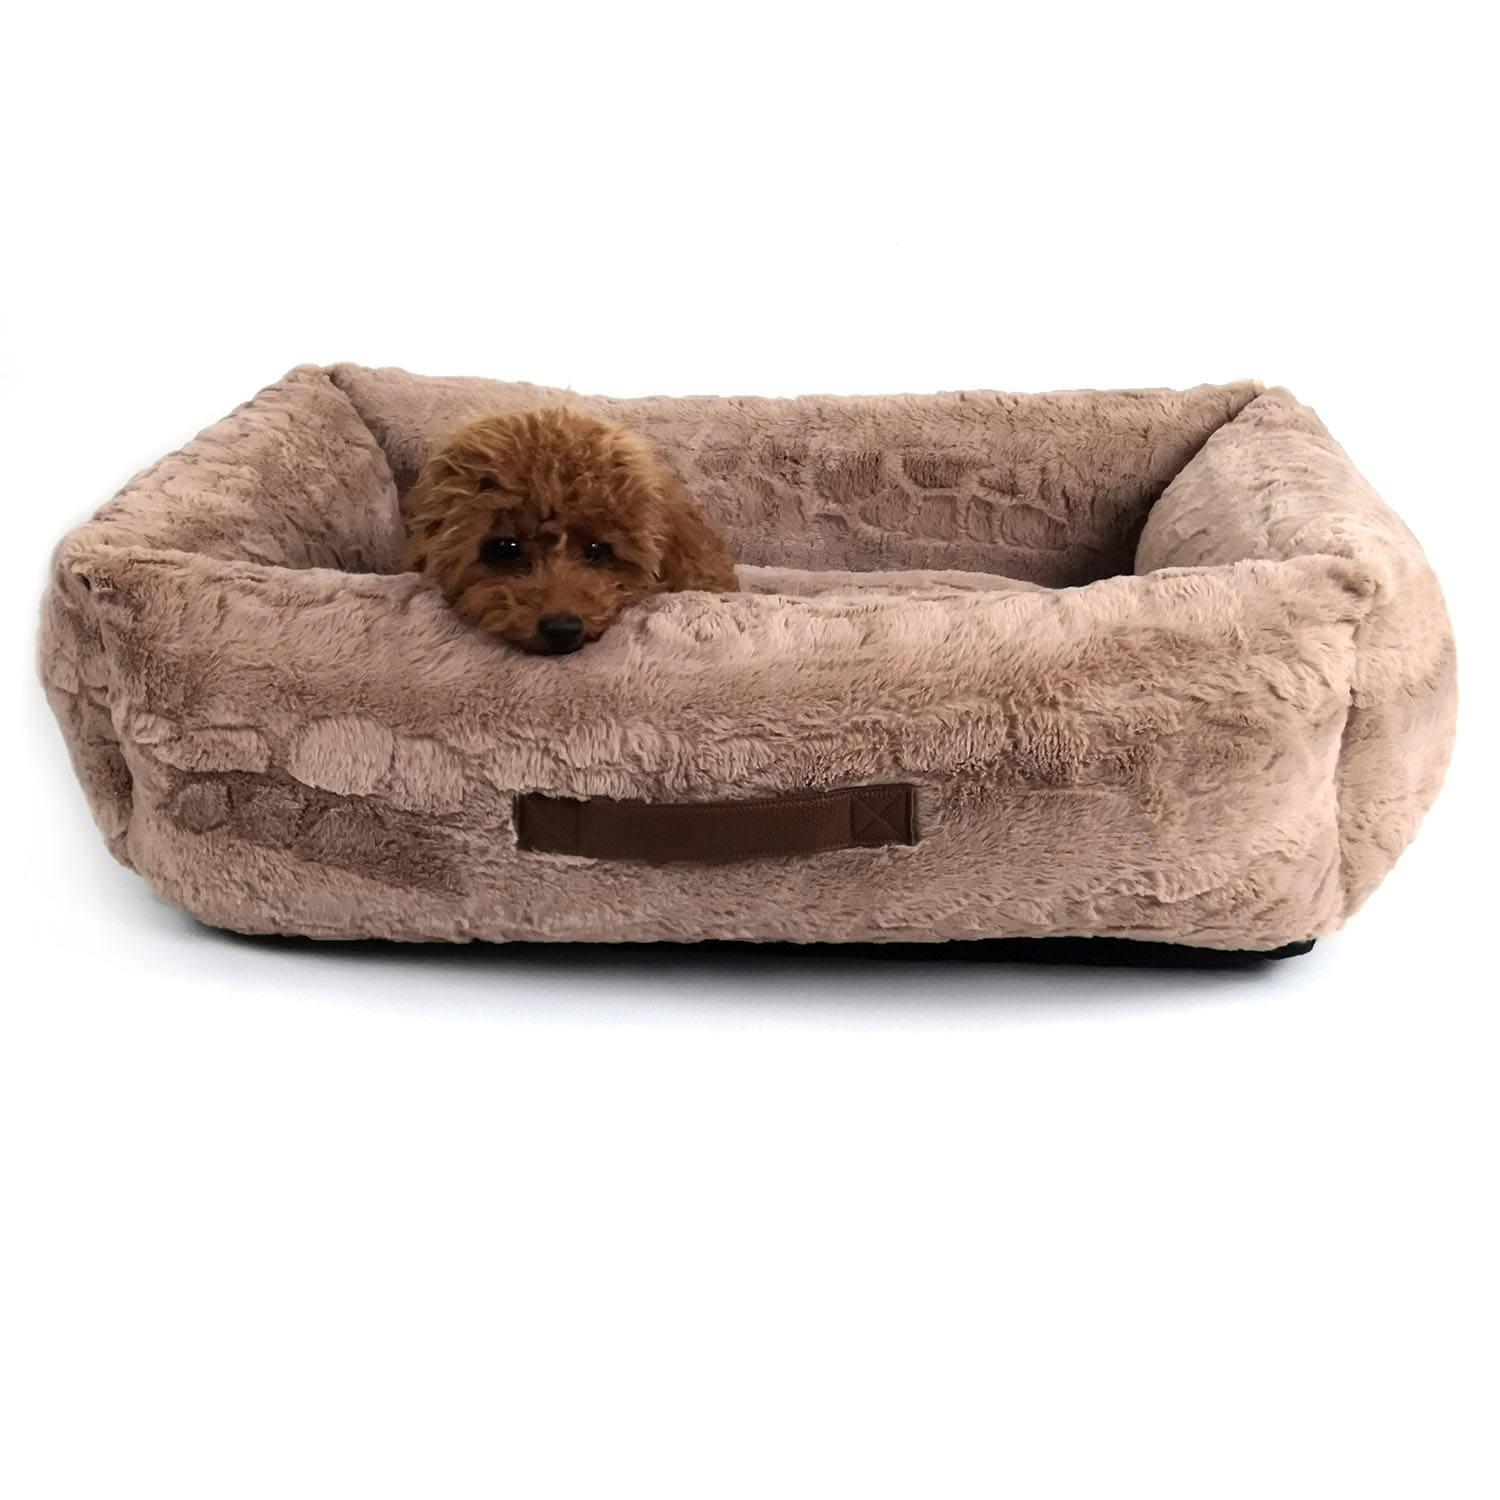 pet Washable Soft Plush Calming Dog Bed Deluxe Plush Dog Crate Benti Pet Cushion Mat Sofa With Plush Pillow Dog Bed